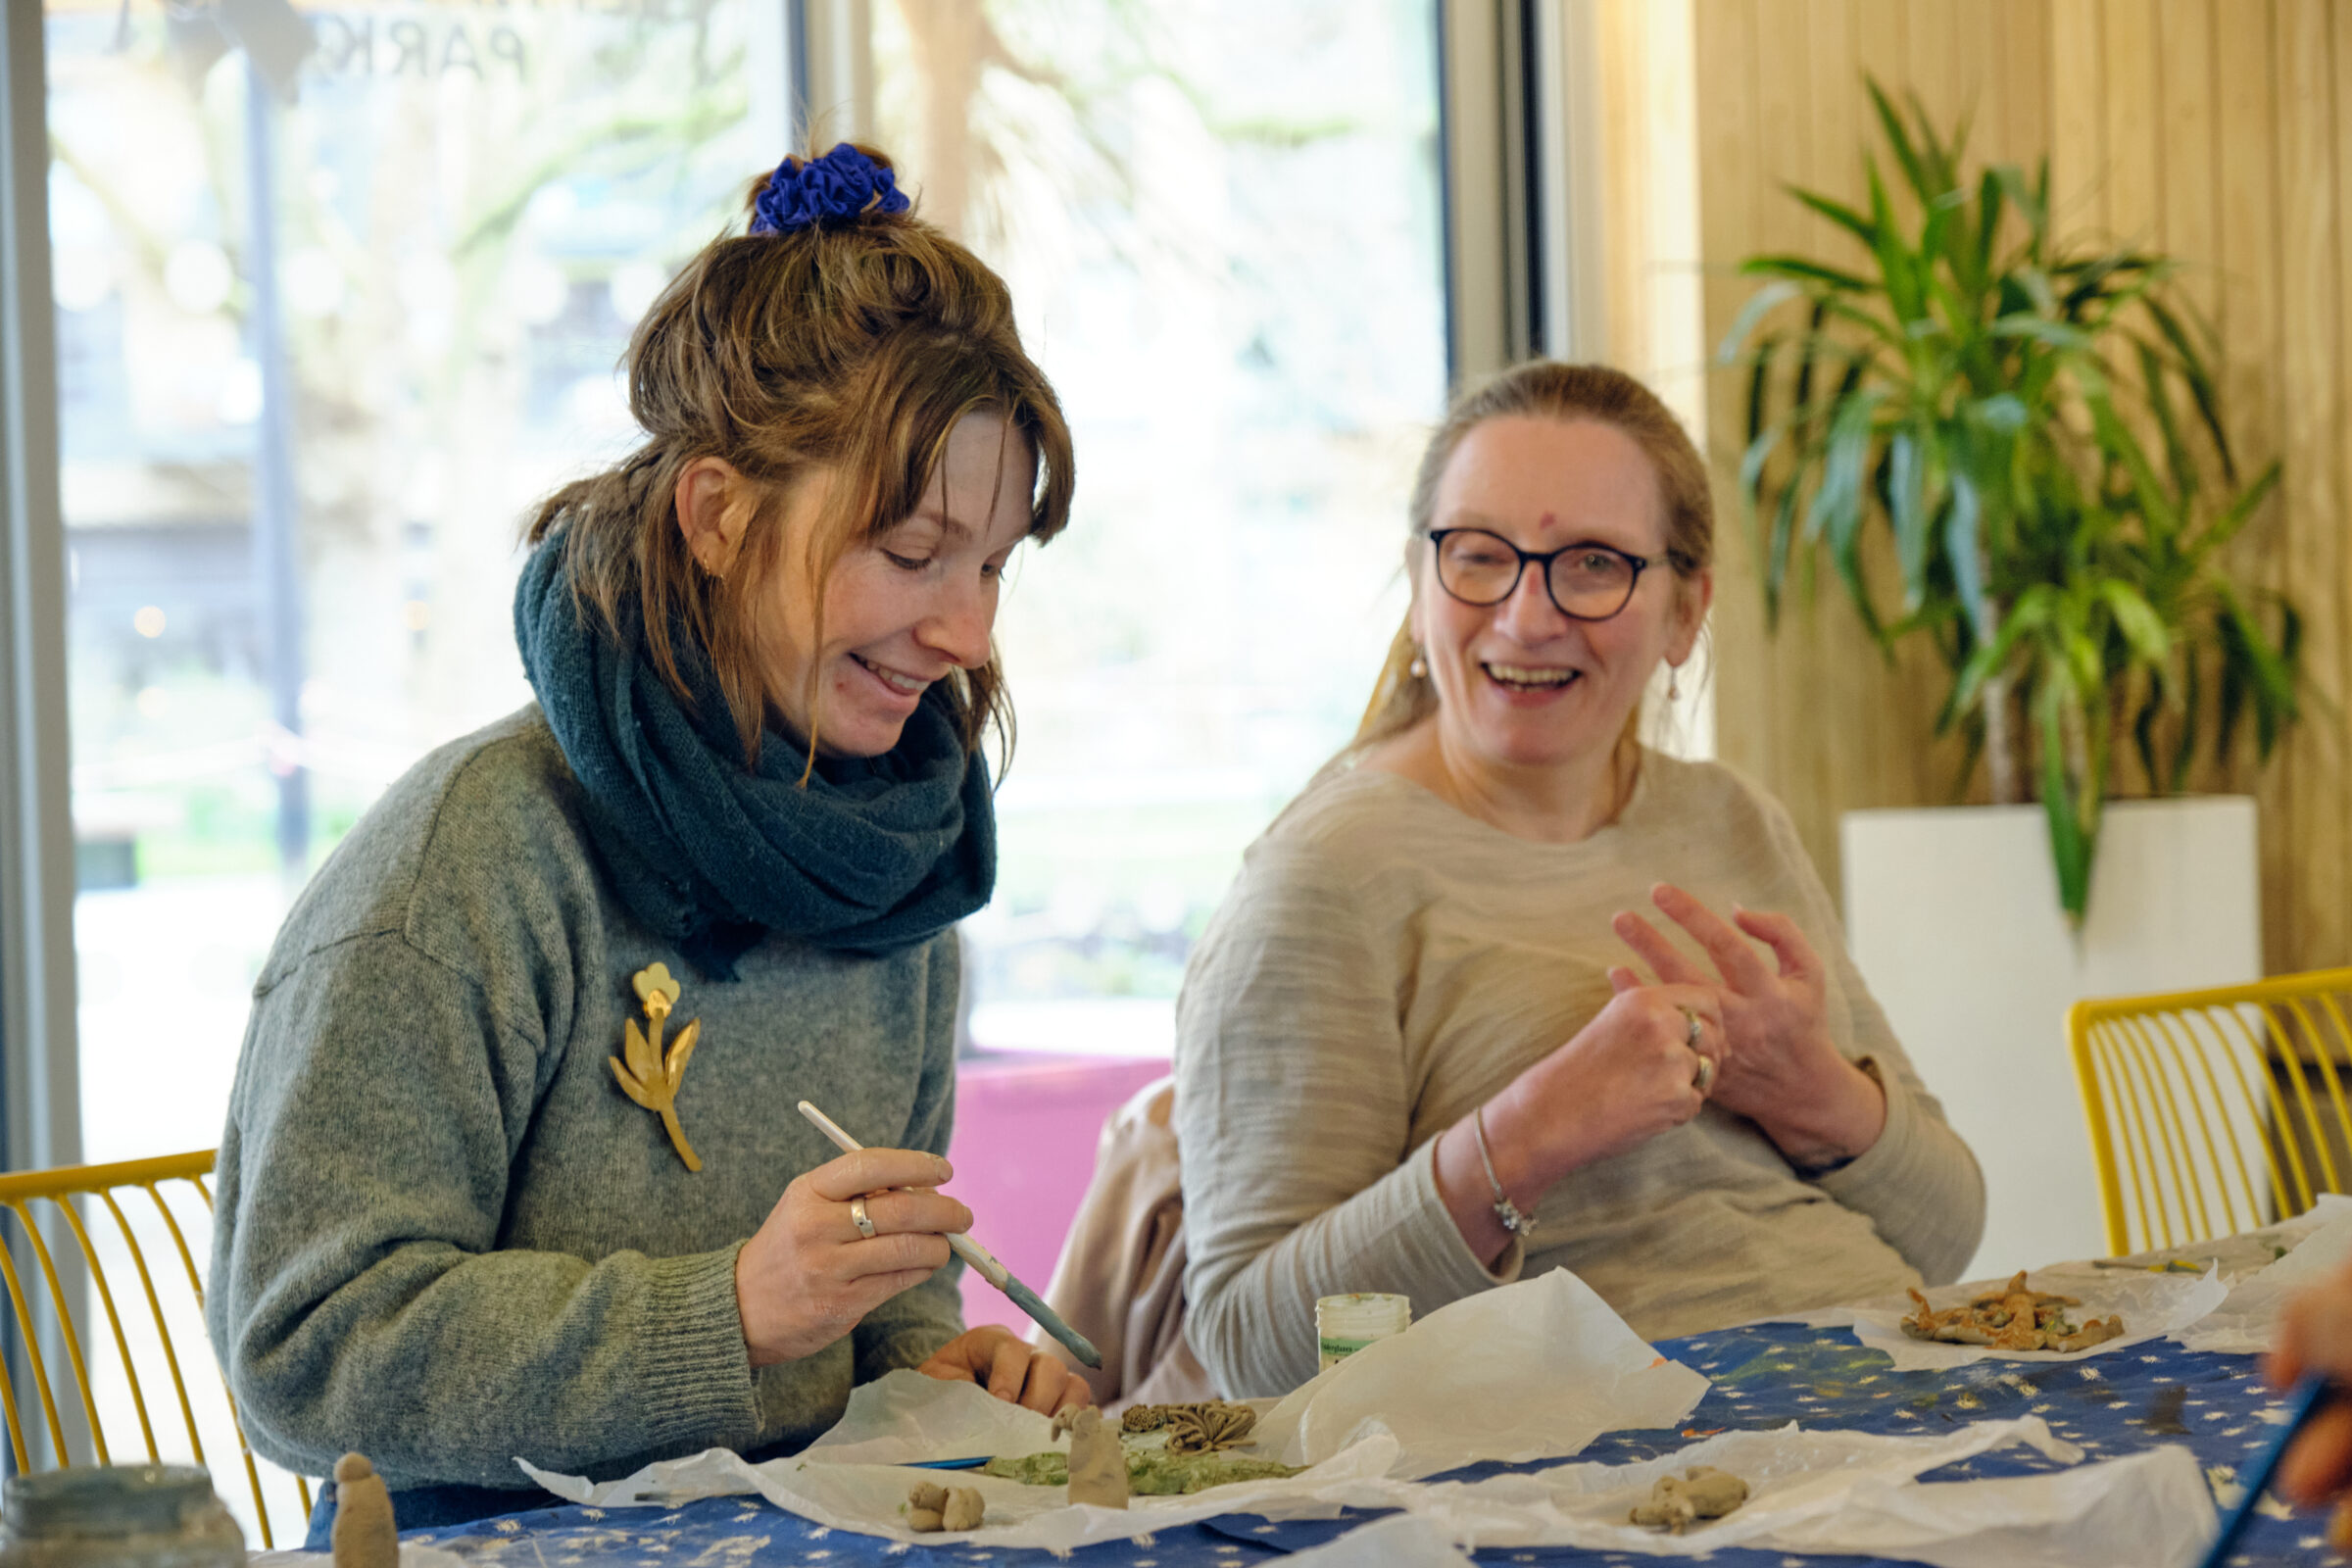 Two women are sitting next to each other, smiling, while painting onto clay items